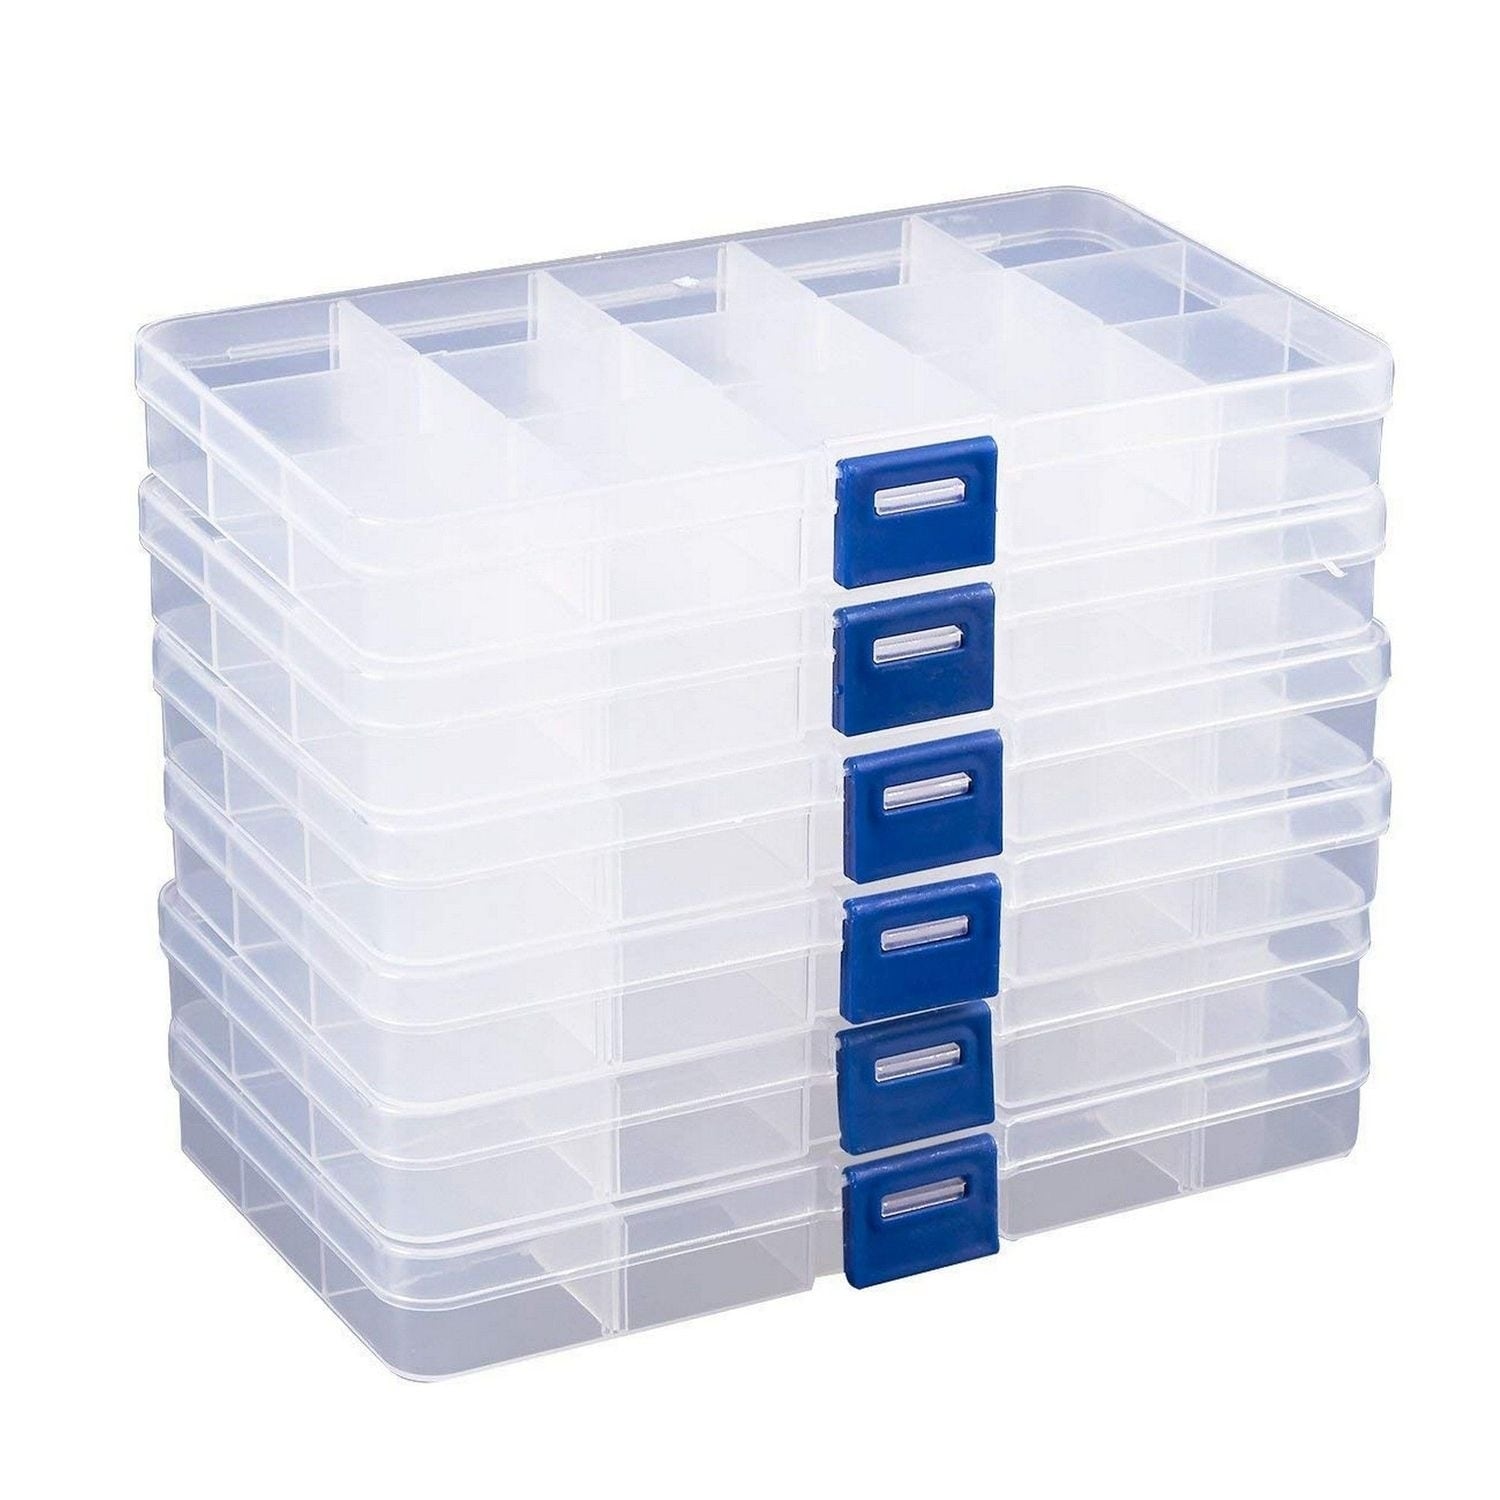 34 Grids, White X 1 DUOFIRE Plastic Organizer Container Storage Box Adjustable Divider Removable Grid Compartment for Jewelry Beads Earring Container Tool Fishing Hook Small Accessories 